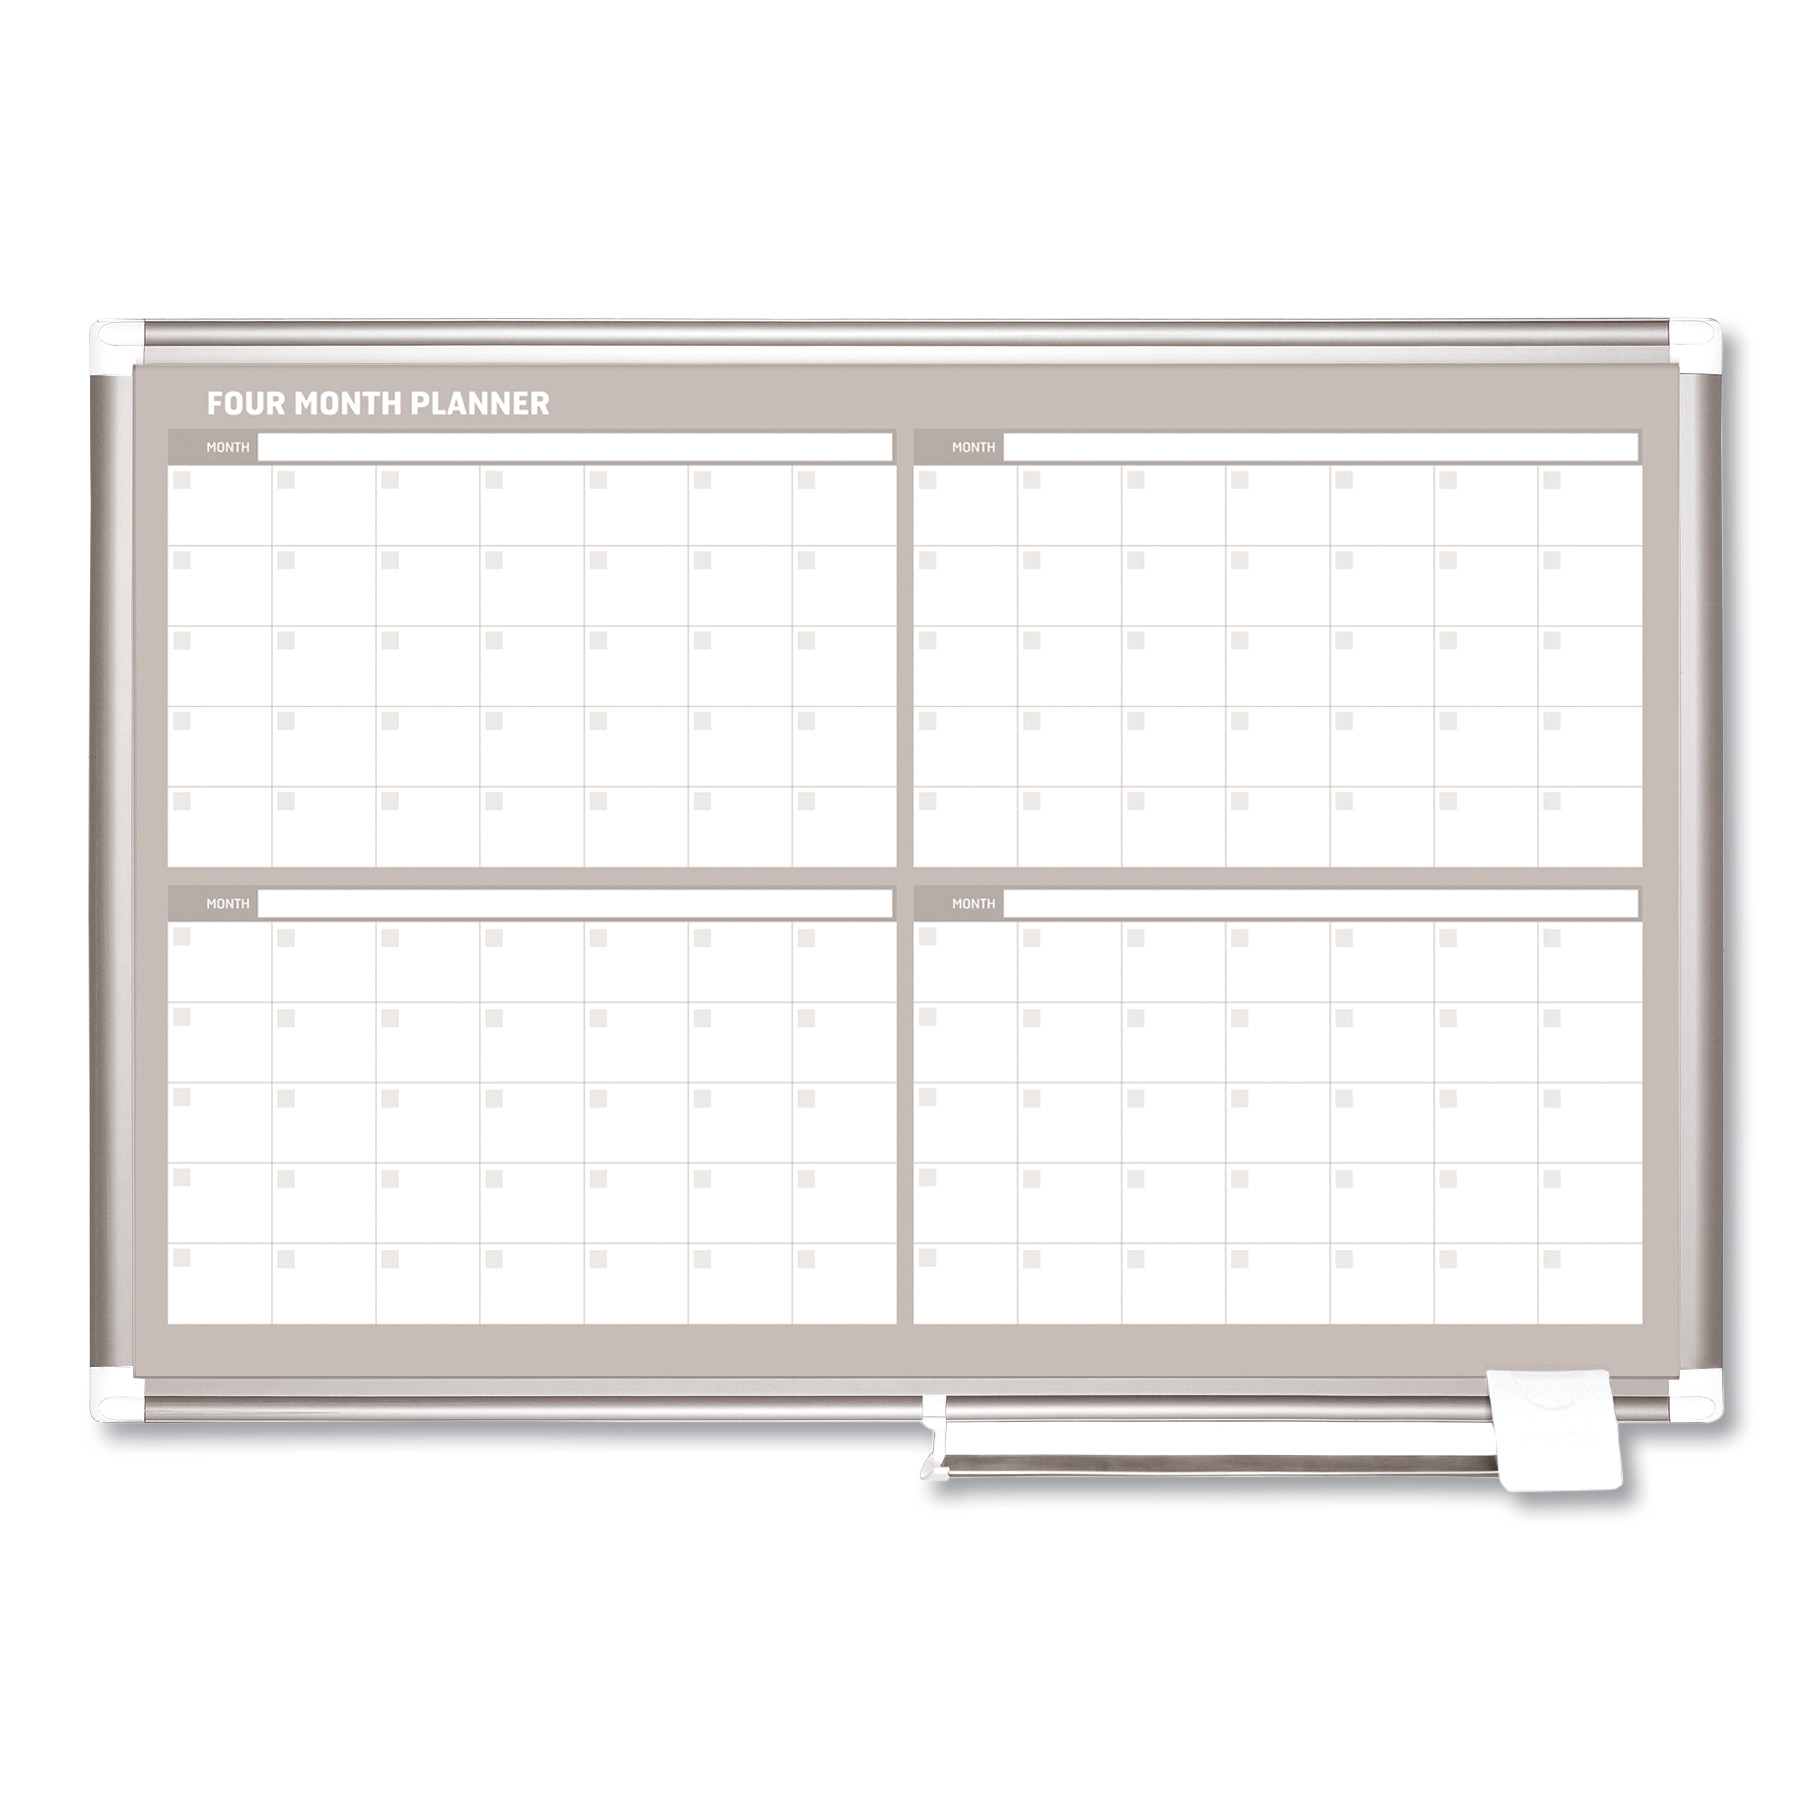 Magnetic Dry Erase Calendar Board, Four Month, 36 x 24, White Surface, Silver Aluminum Frame